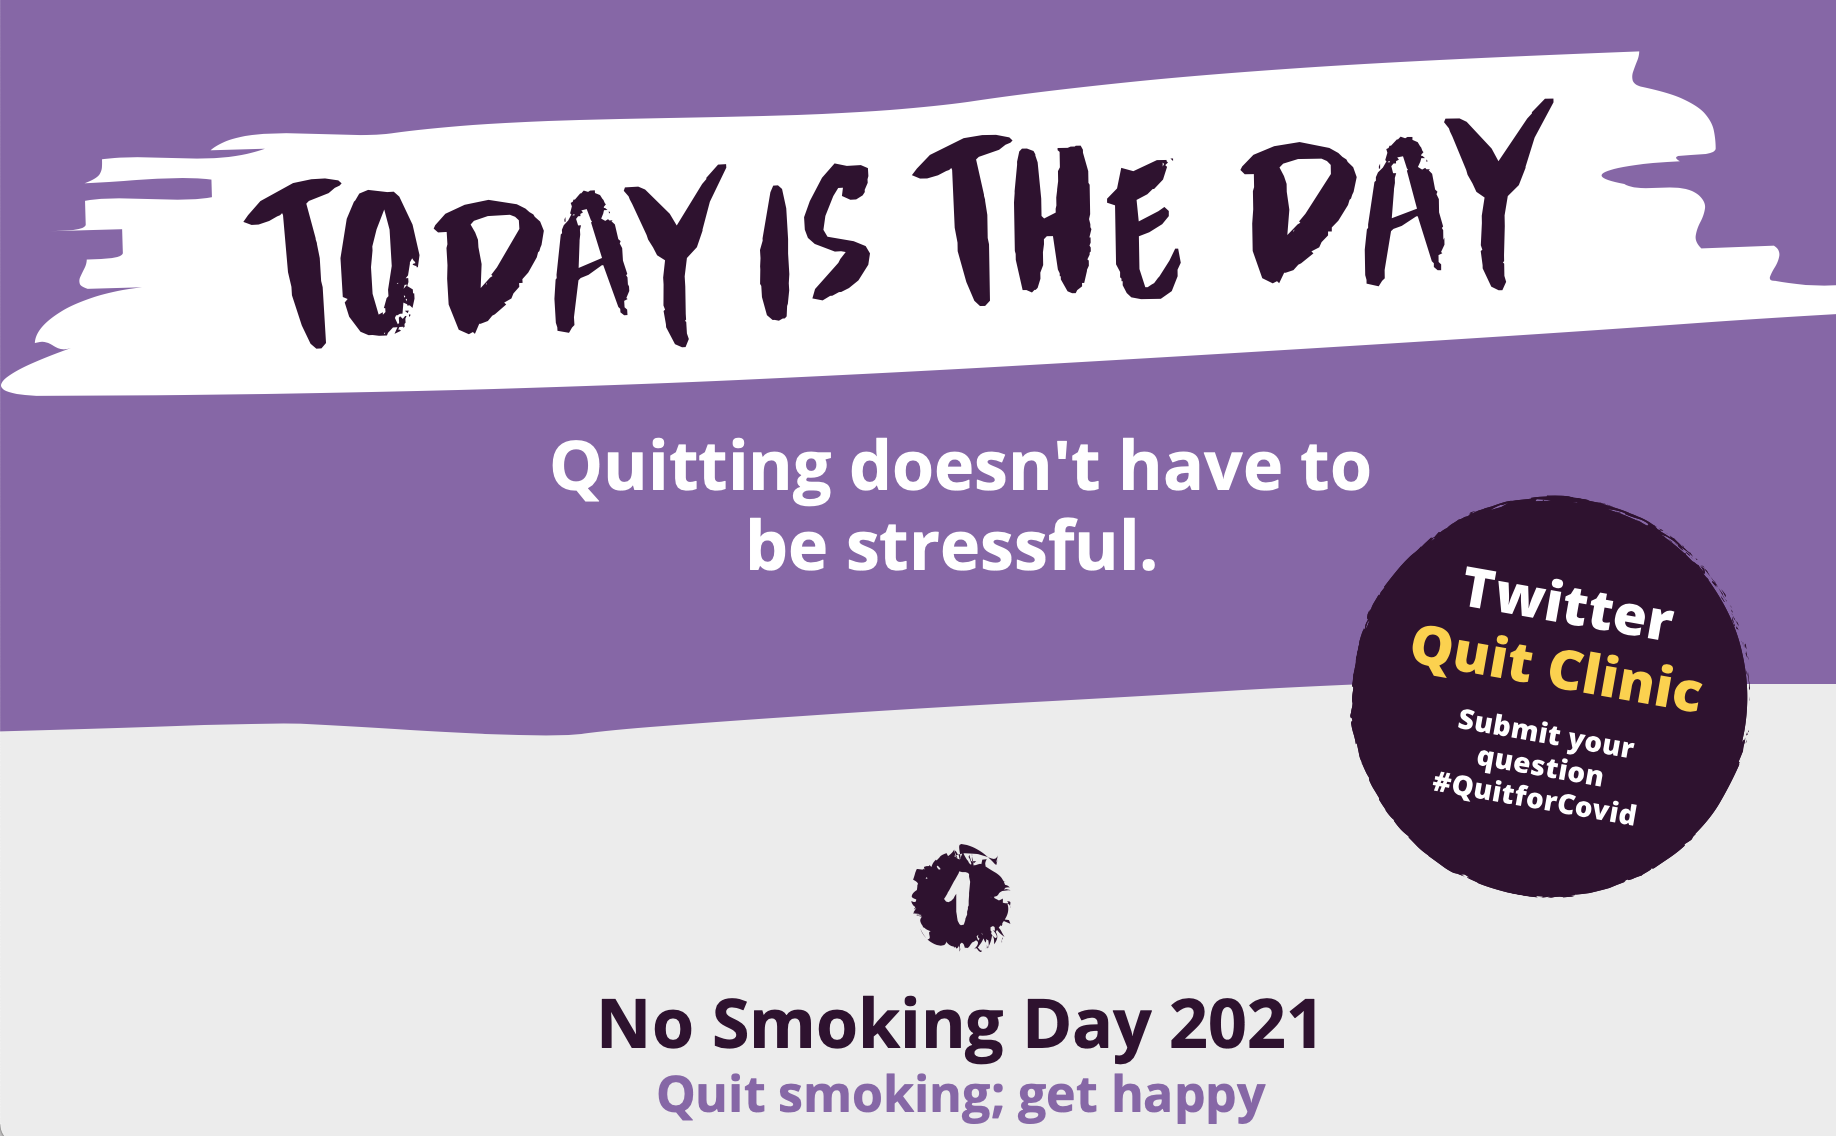 Today is the Day - No Smoking Day 2021 logo.png